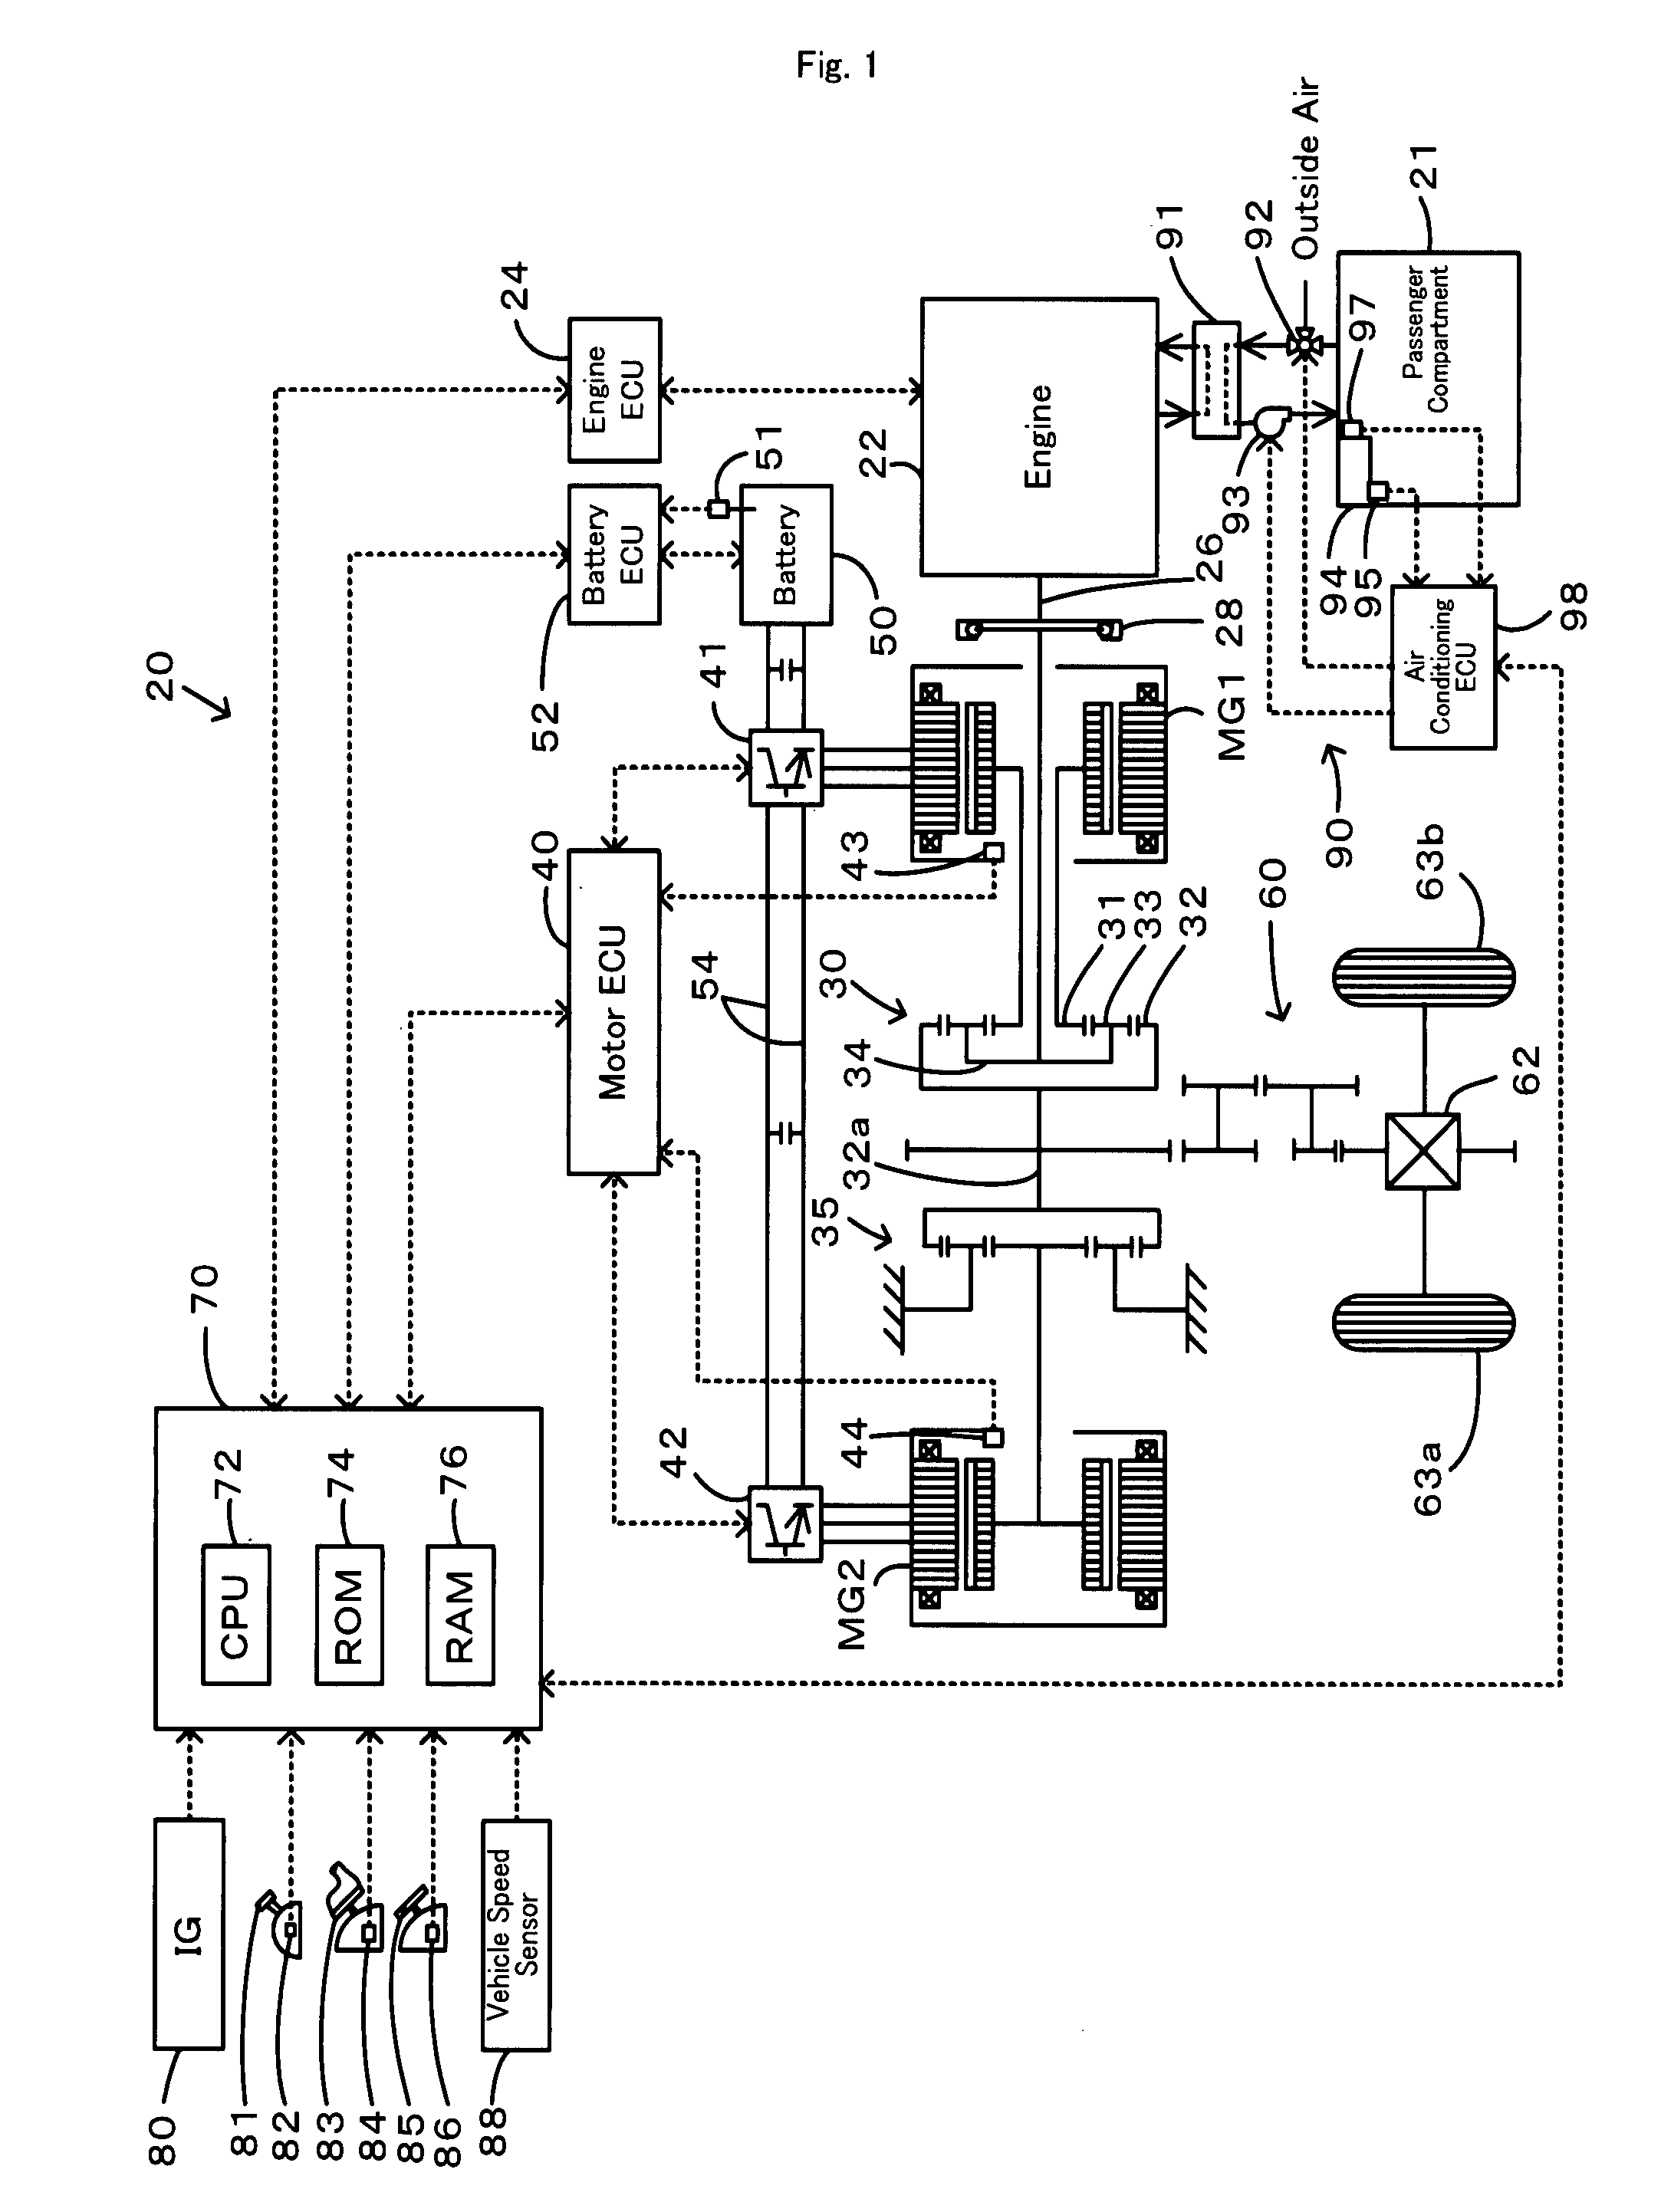 Motor Vehicle and Control Method of Internal Combustion Engine